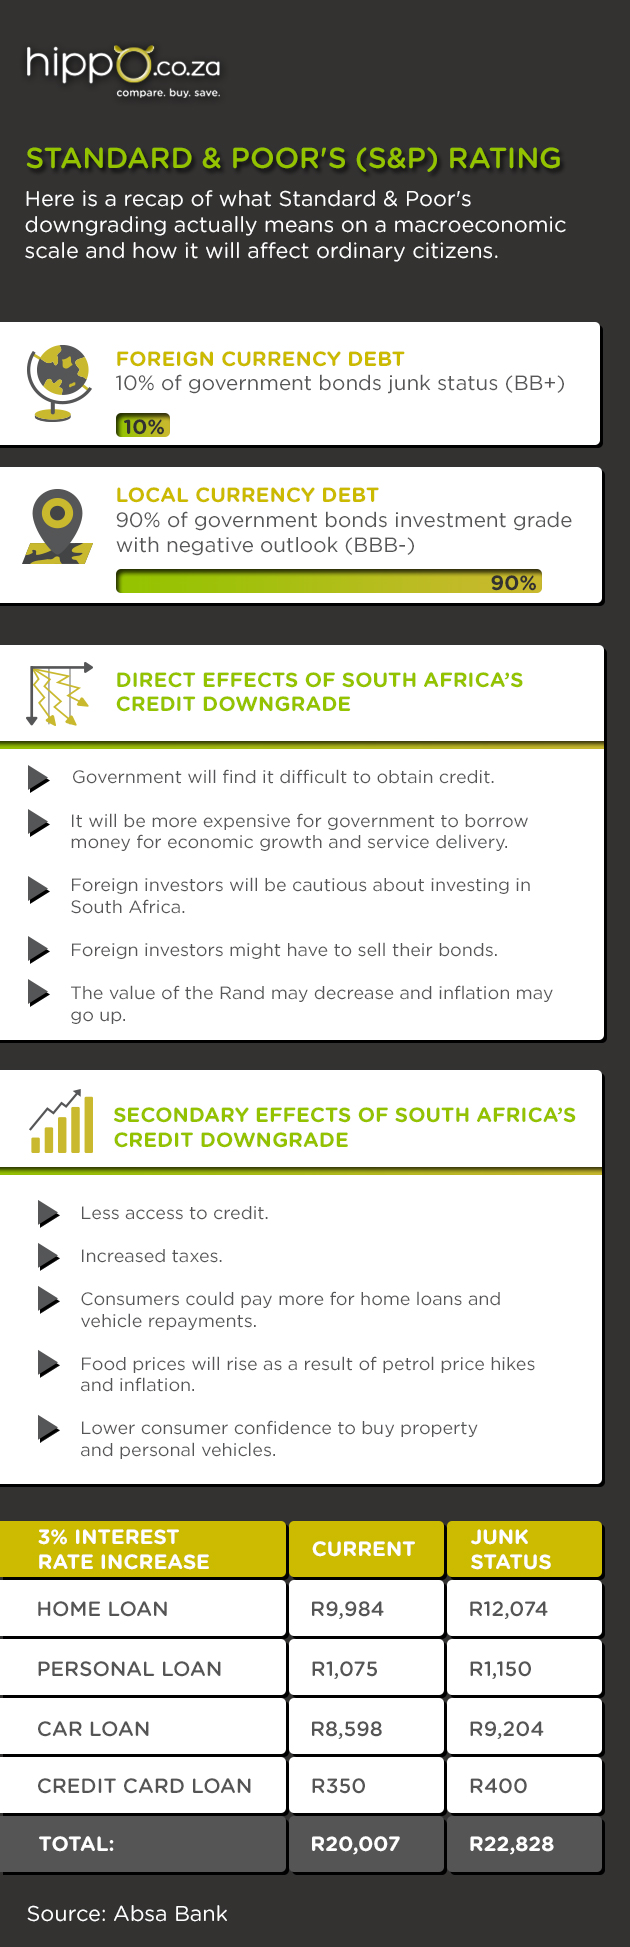 Macroeconomic Affects of Downgrade | Infographic | Personal Loan News | Hippo.co.za